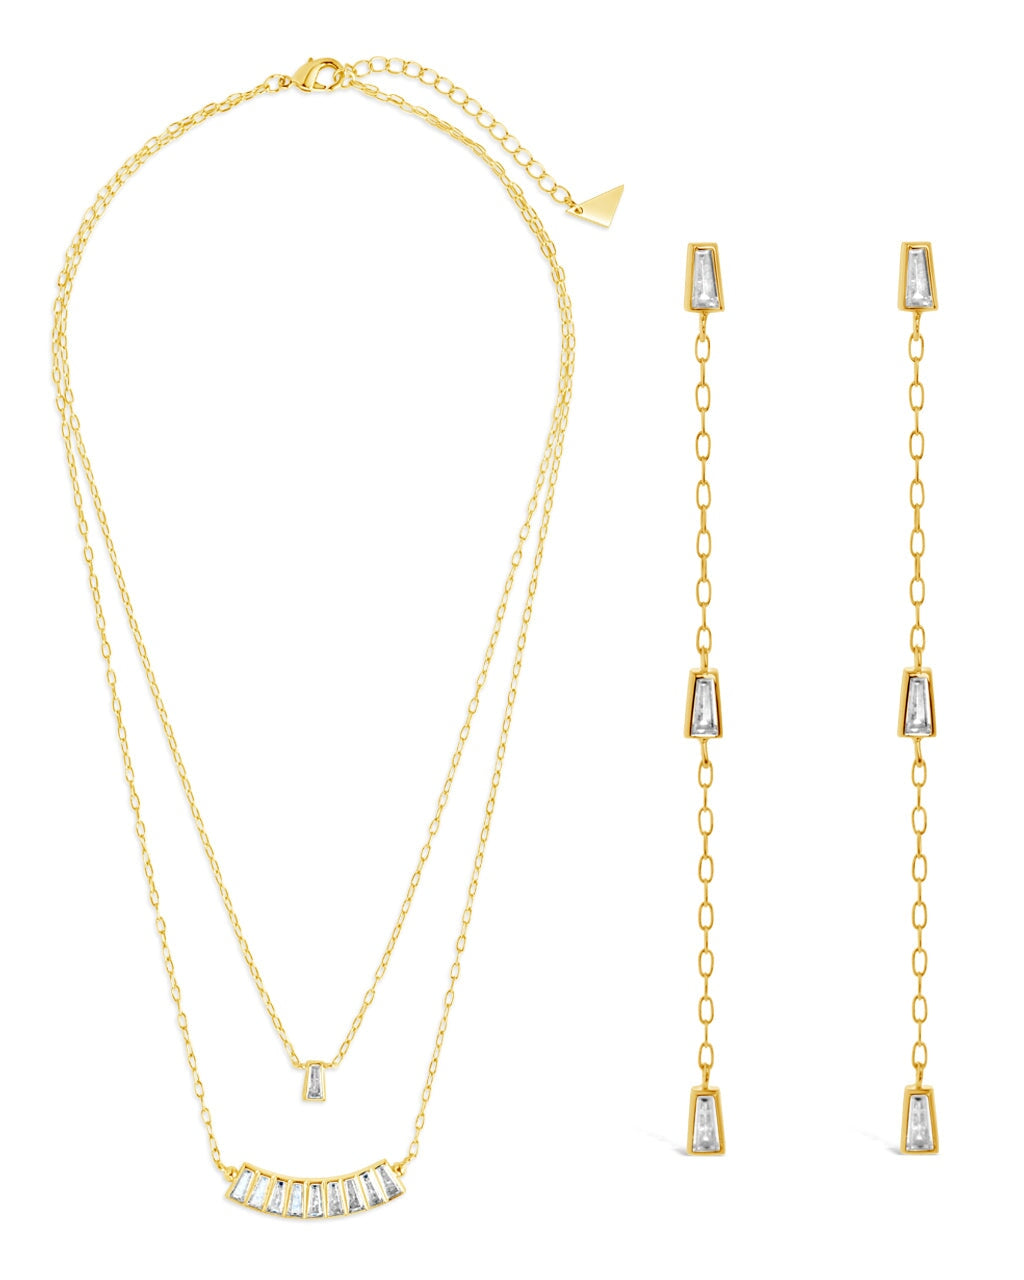 Tapered CZ Drop Earrings & Layered Necklace Set Bundles Sterling Forever 